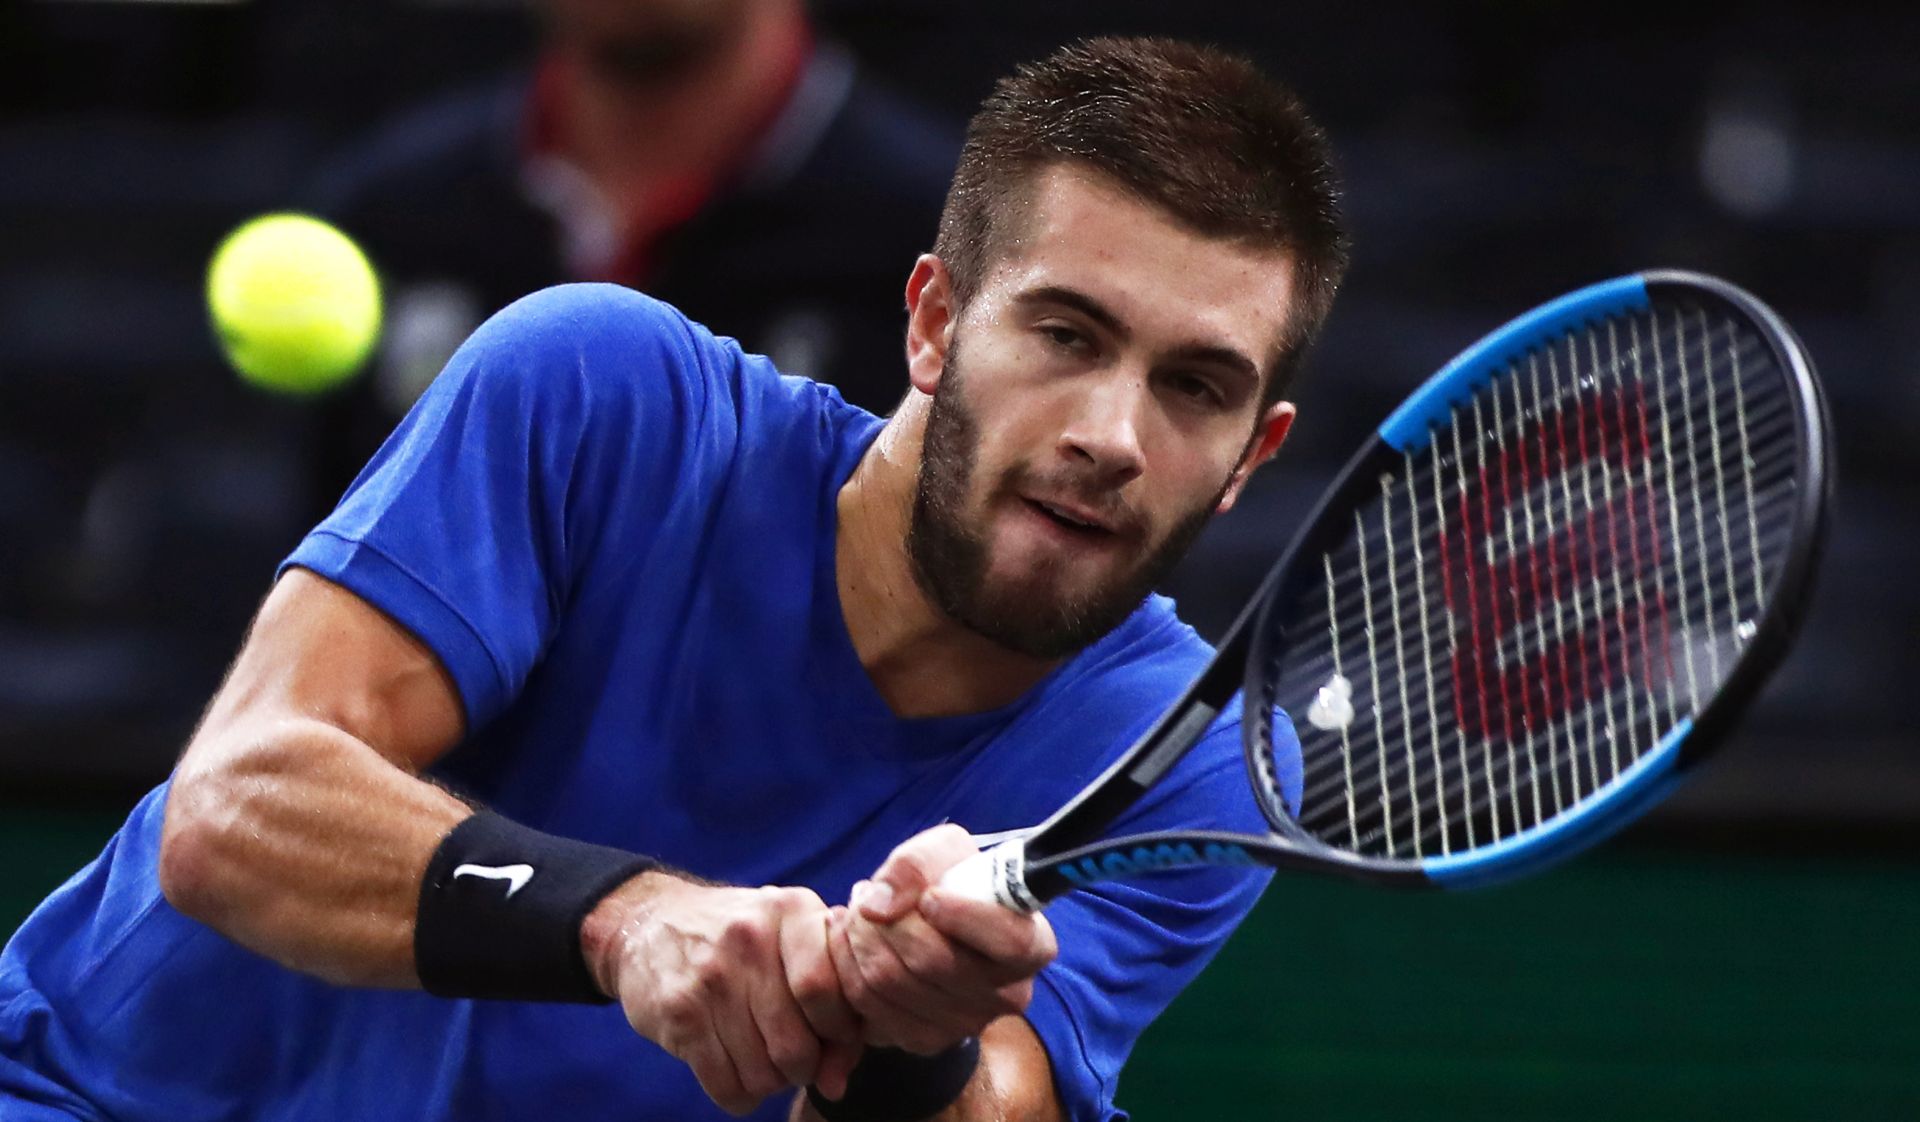 epa07956209 Borna Coric of Croatia in action against Fernando Verdasco of Spain during their first round match at the Rolex Paris Masters tennis tournament in Paris, France, 28 October 2019.  EPA/IAN LANGSDON